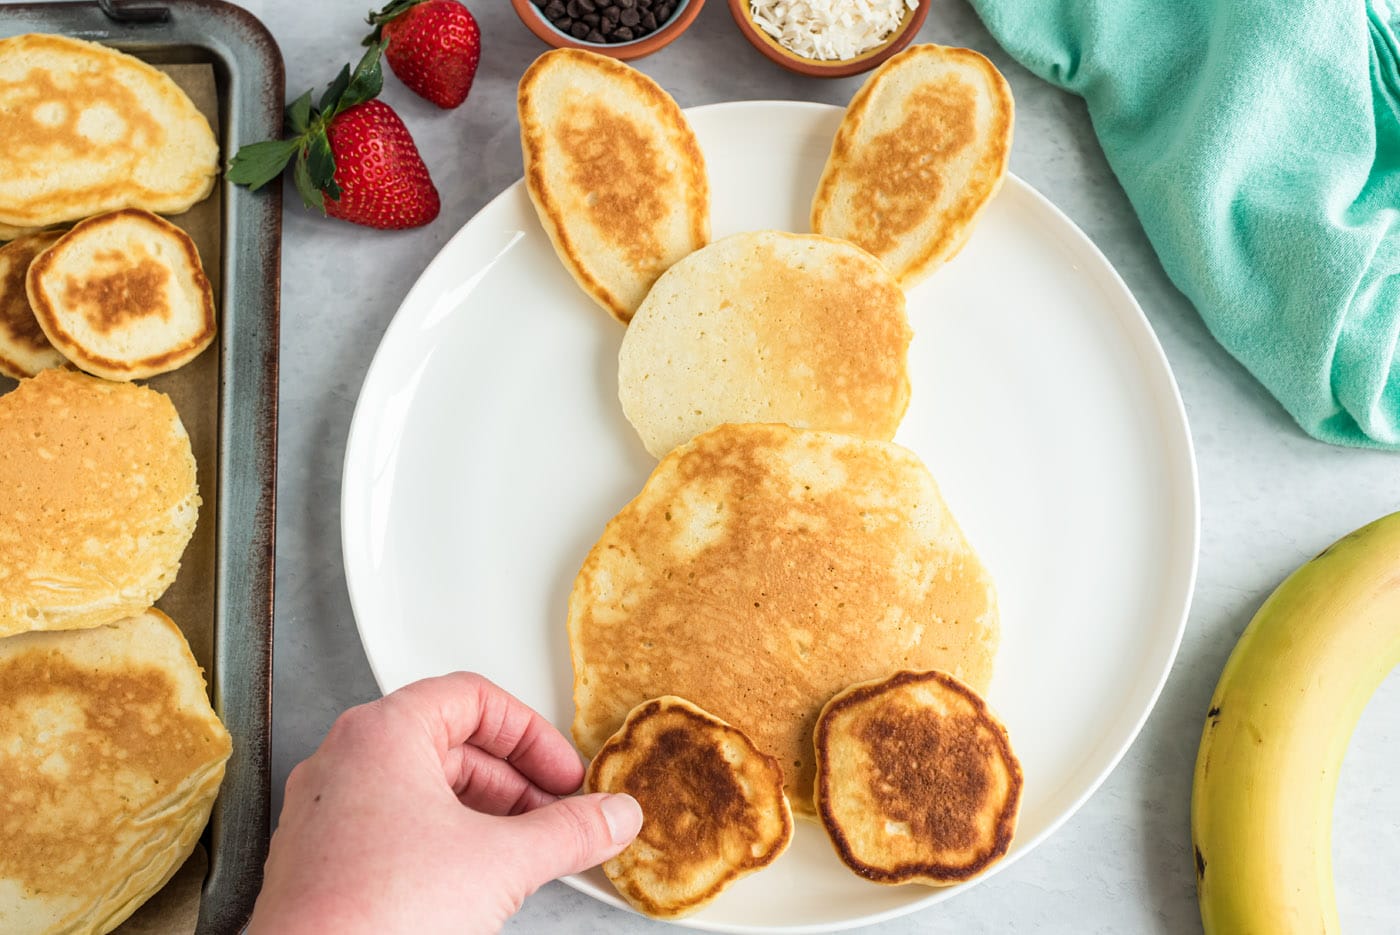 bunny butt pancakes on a plate